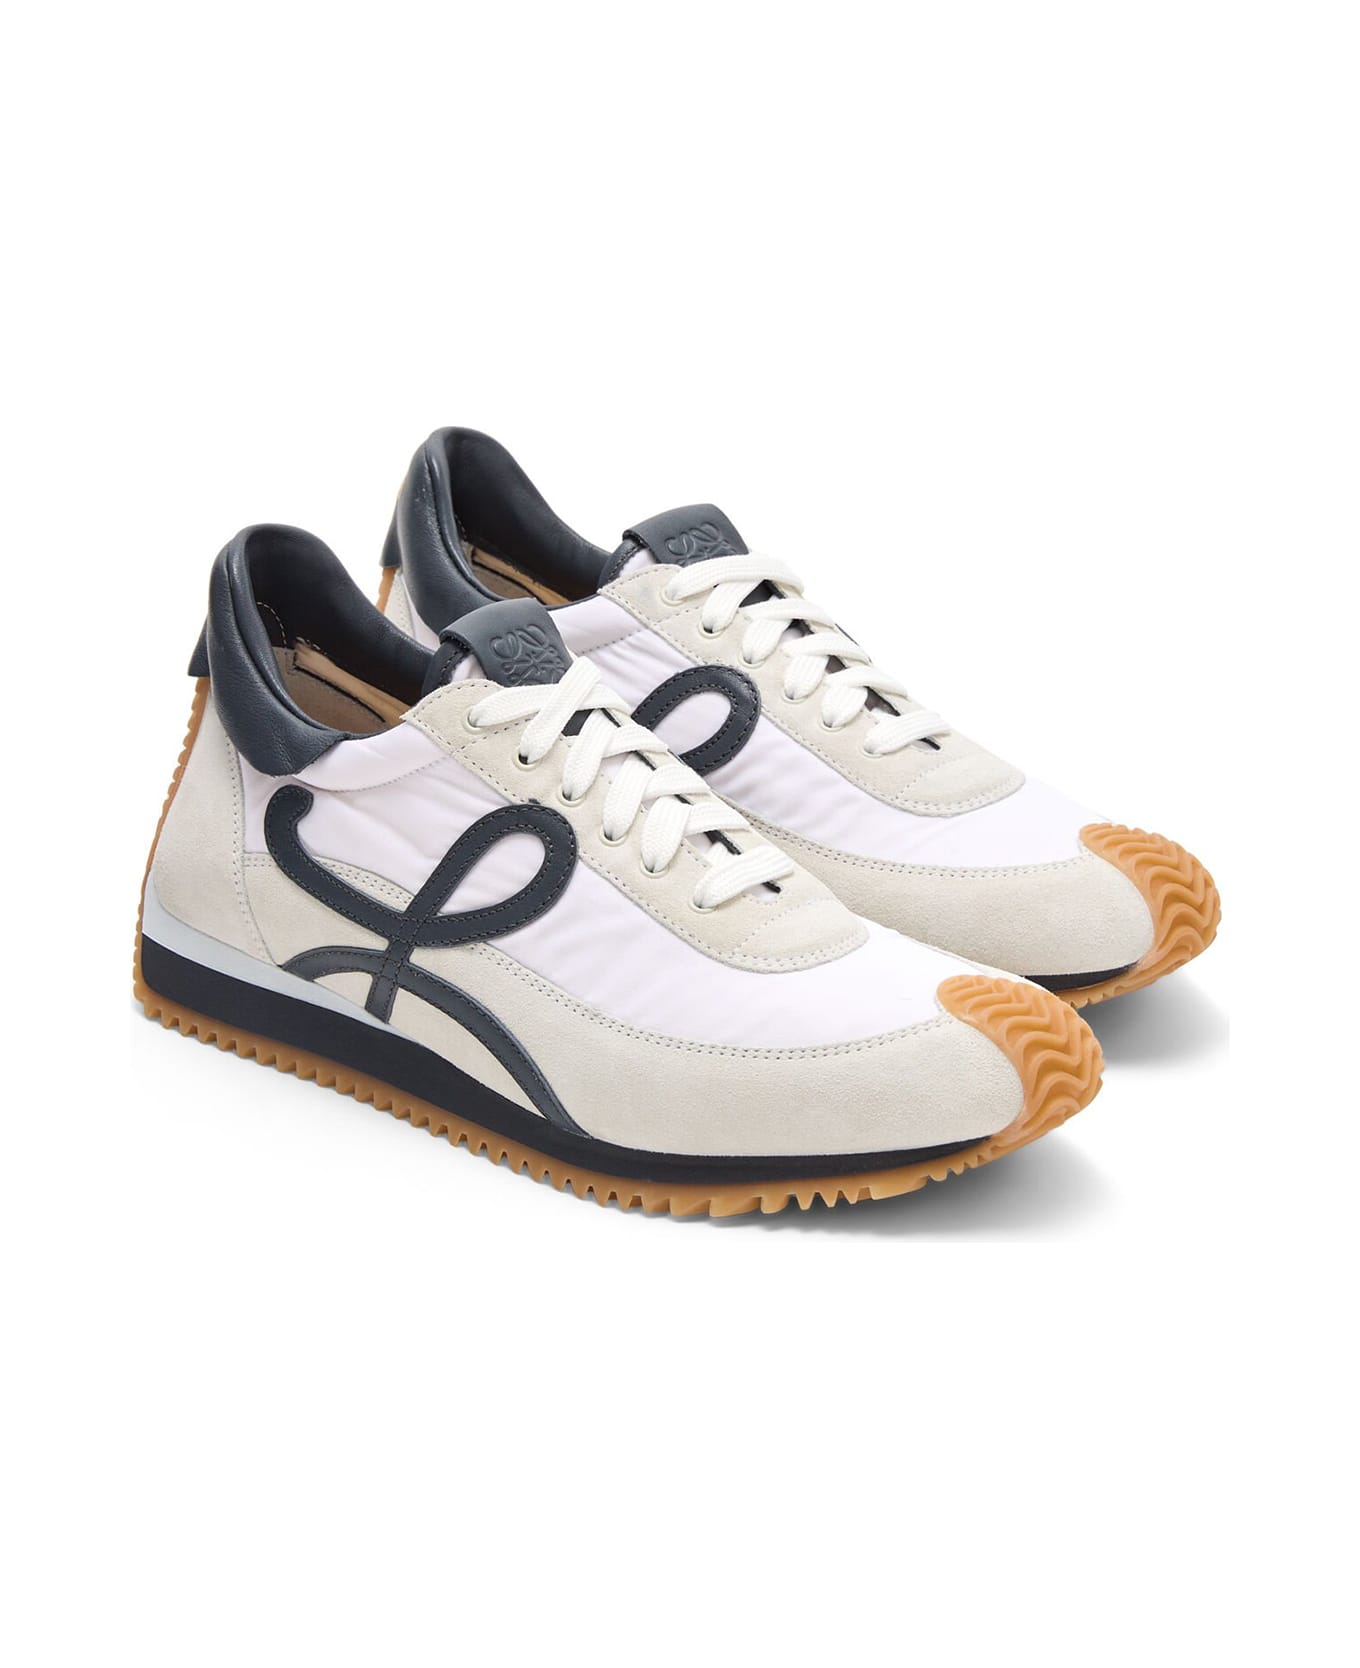 Loewe Sneakers - Blue anthracite/white